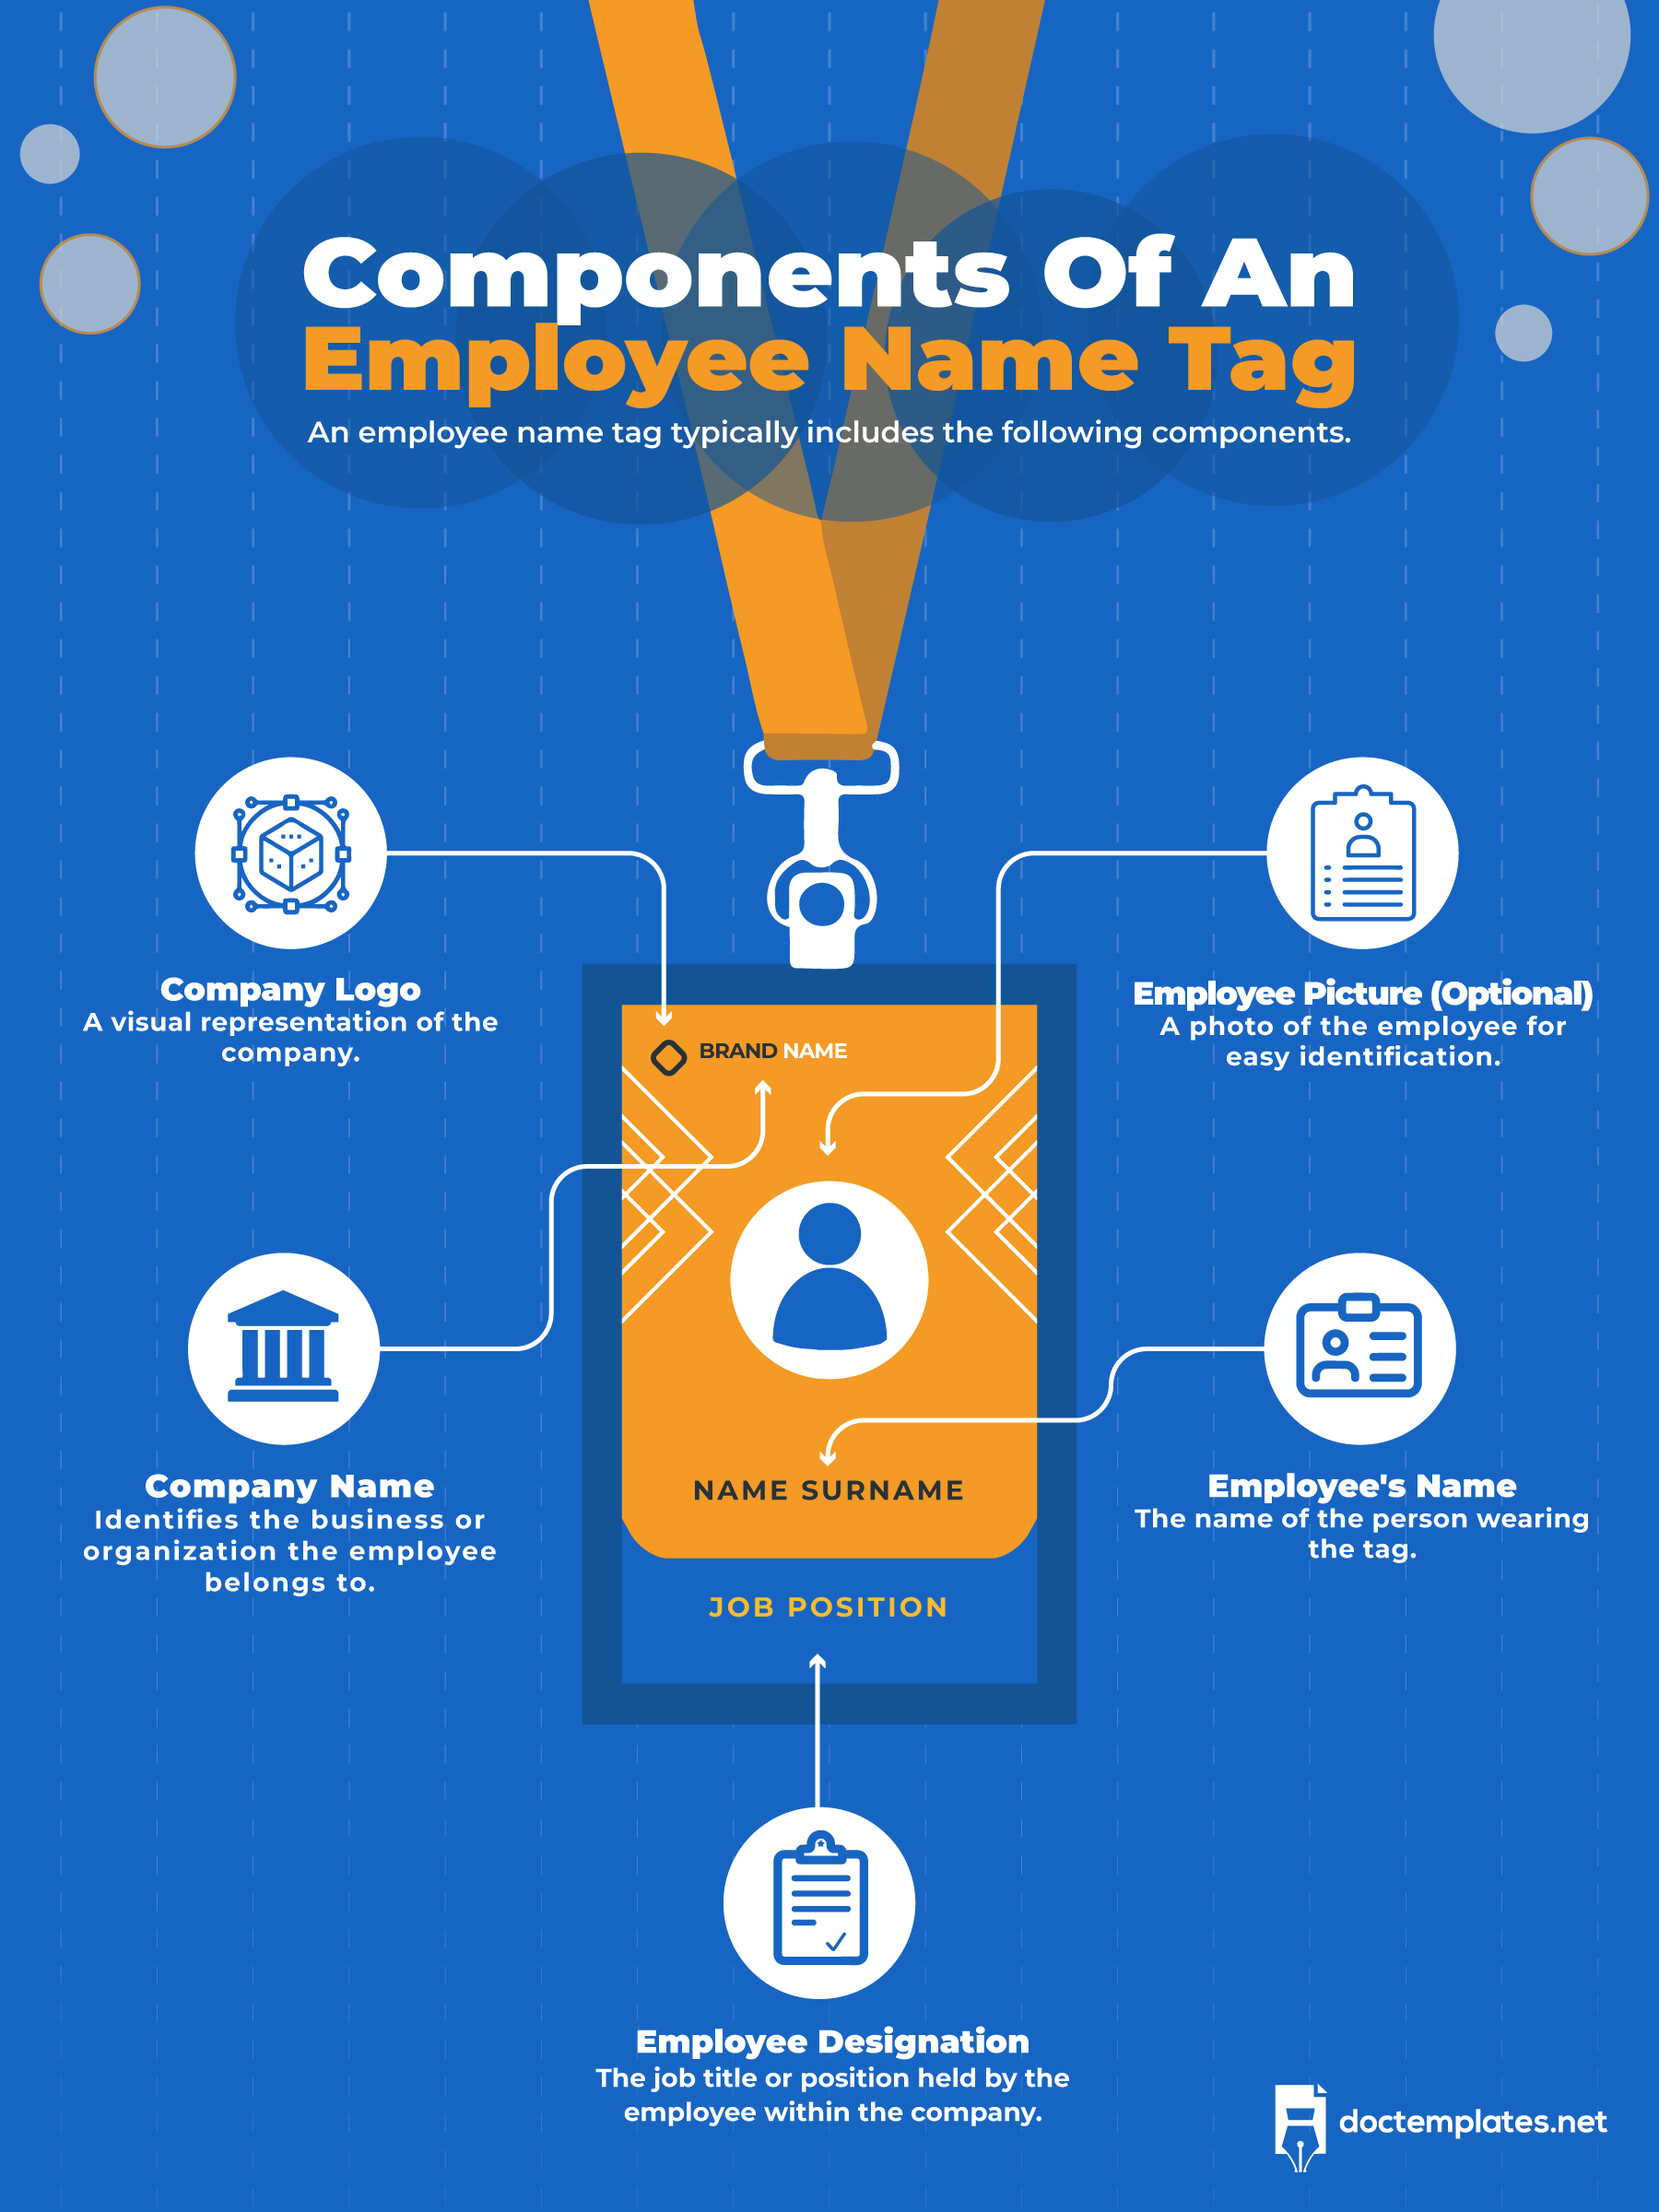 This infographic is about employee name tag components.